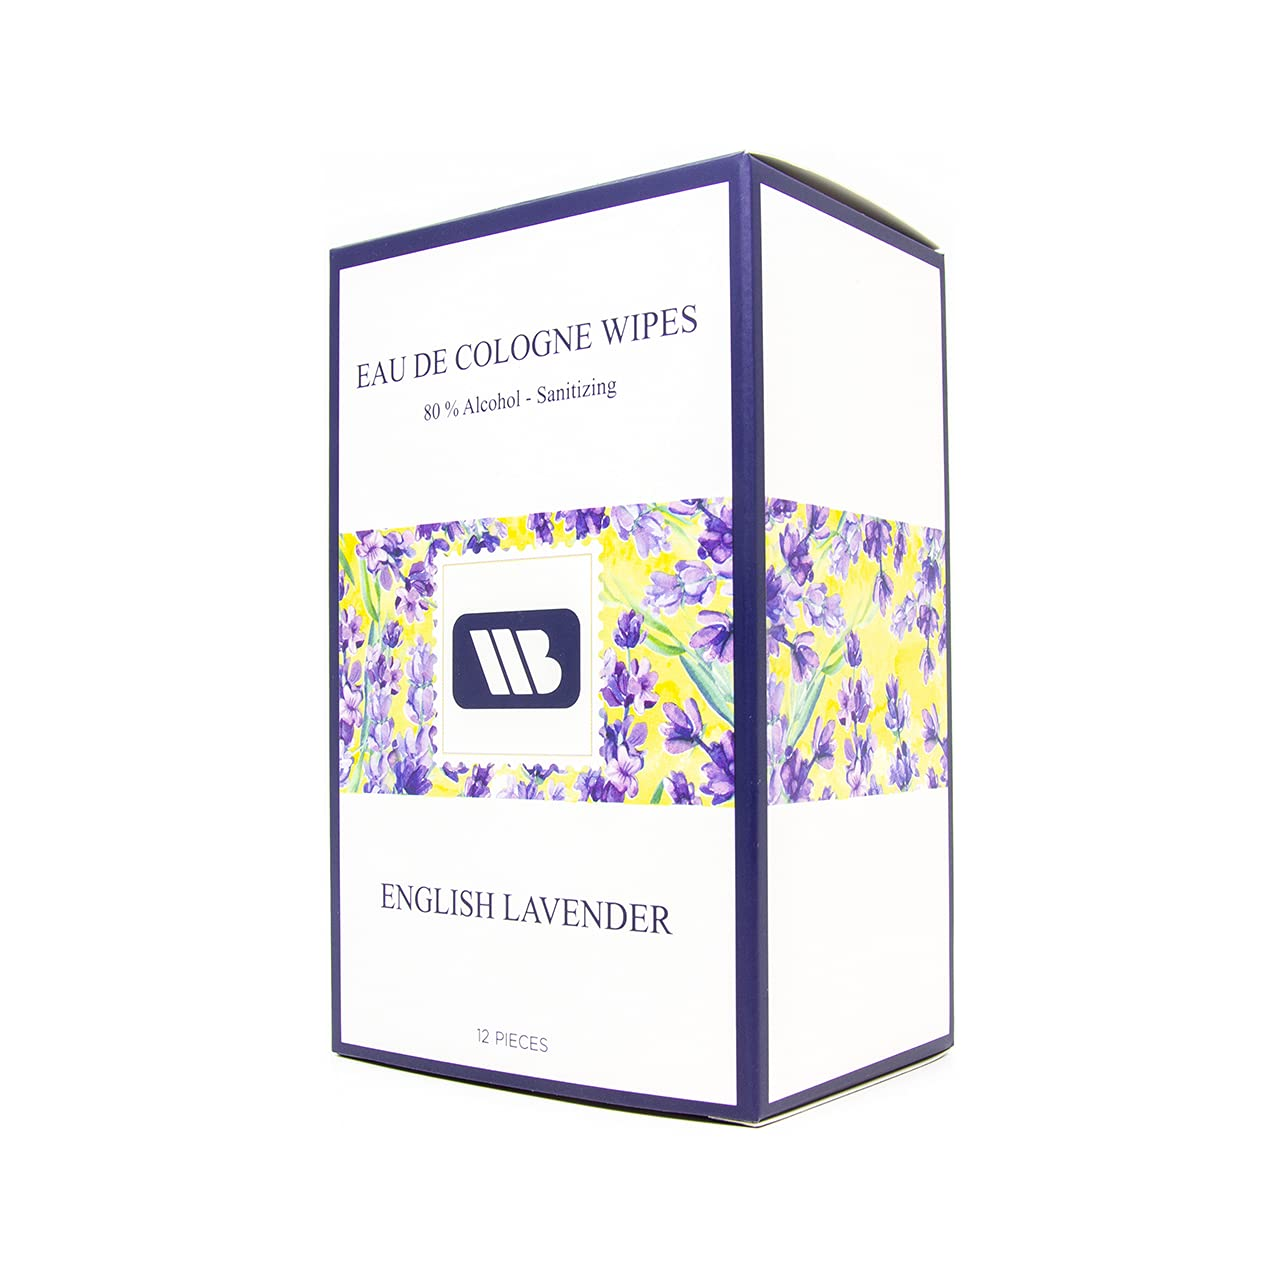 World Brands Eau the Cologne Sanitizing Wipes (English Lavender), 8X8 Inch